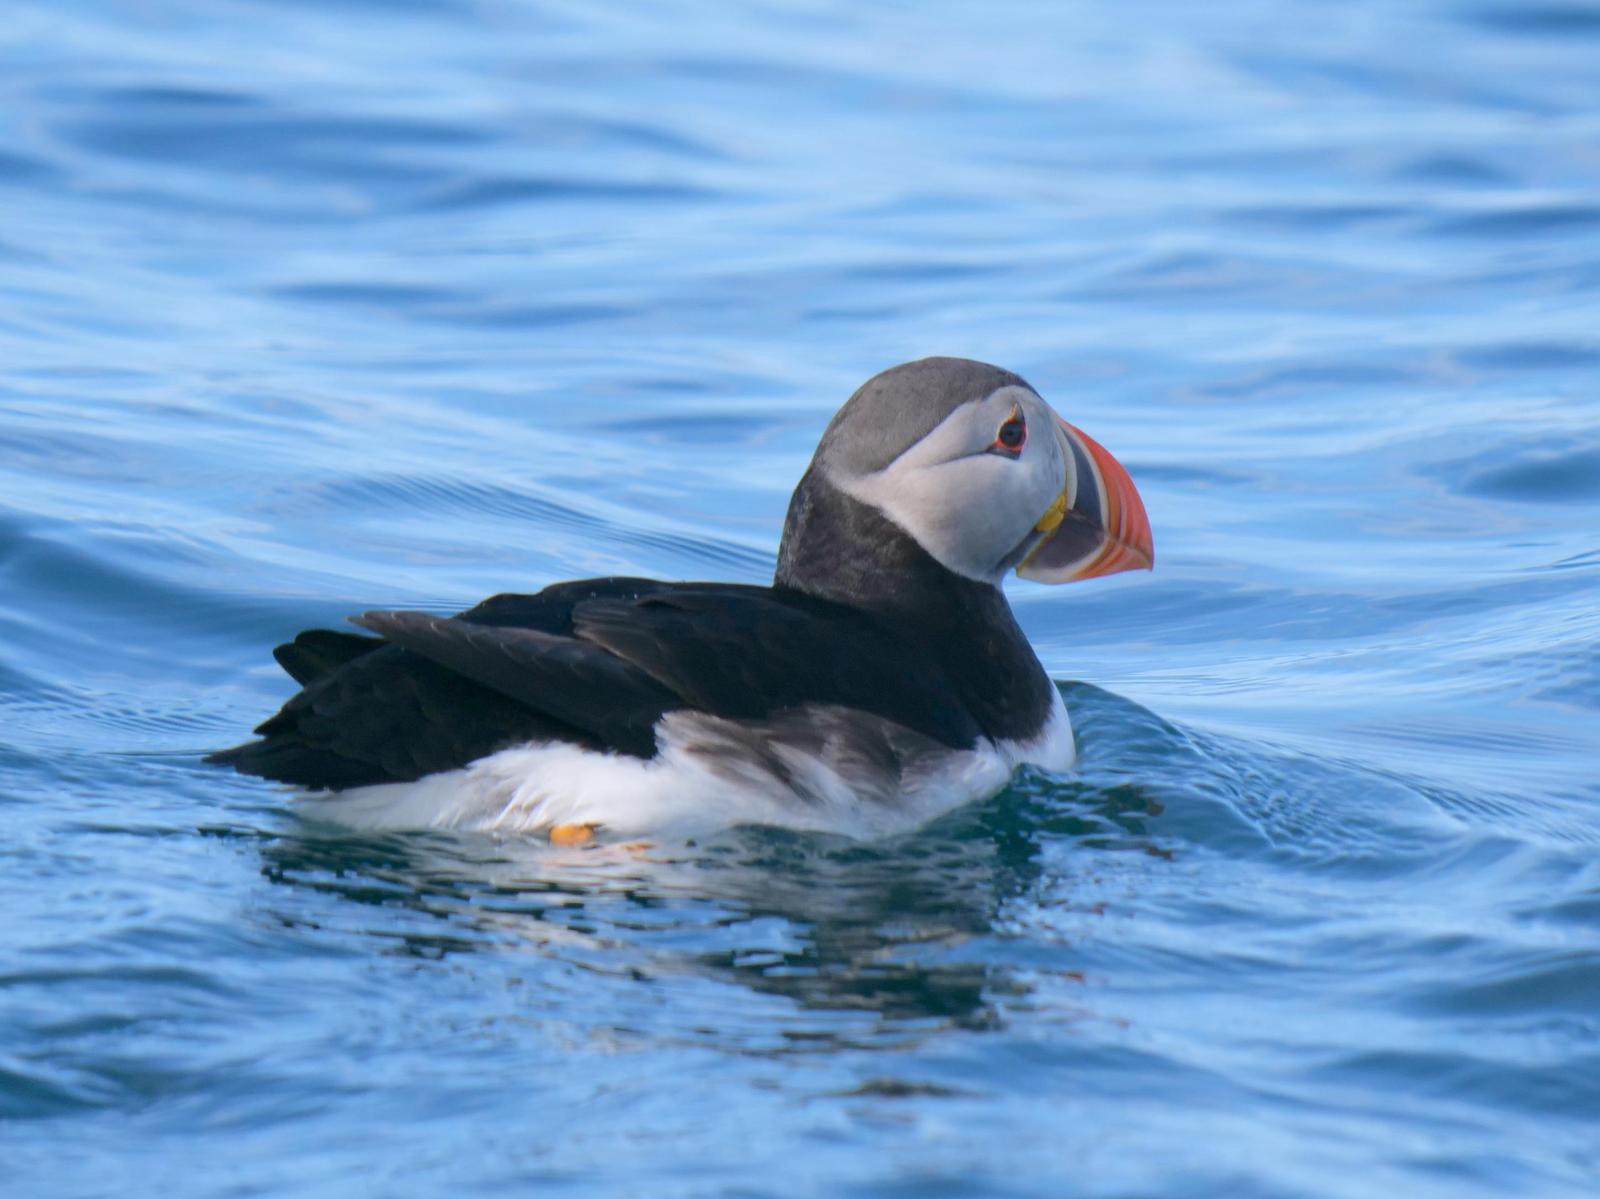 Atlantic Puffin Photo by Peter Lowe